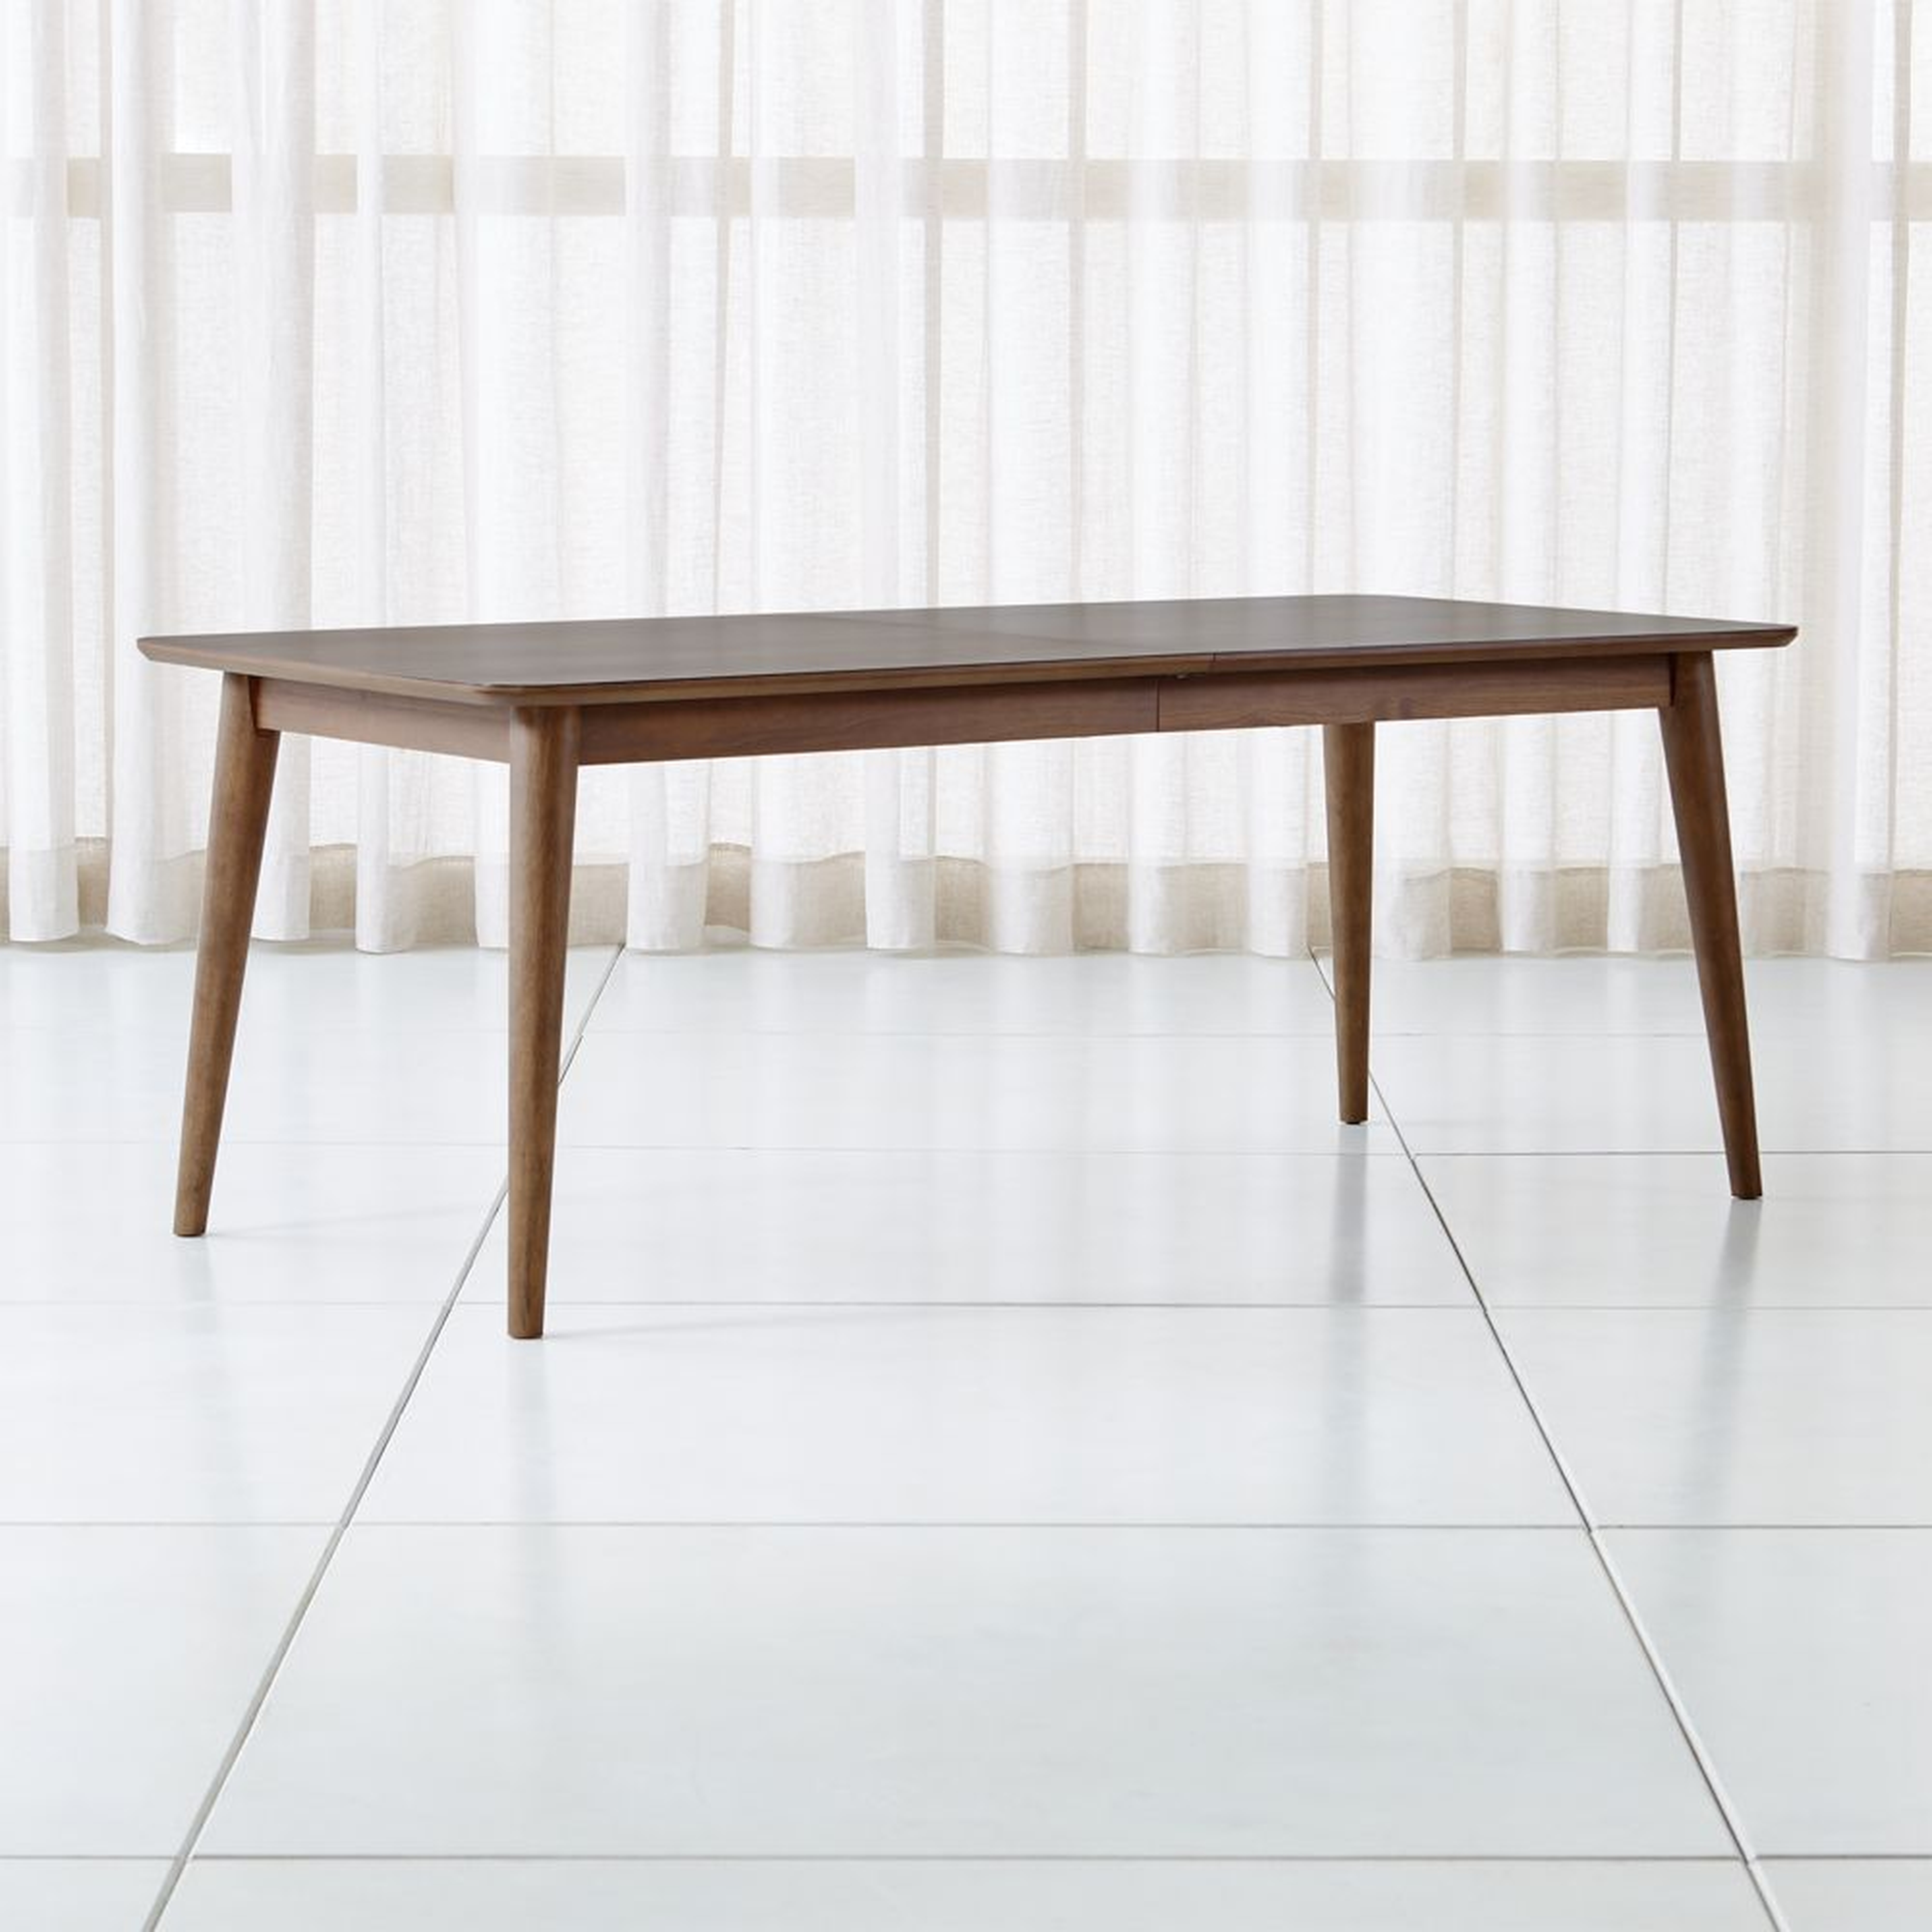 Tate Walnut Extendable Midcentury Dining Table - Crate and Barrel